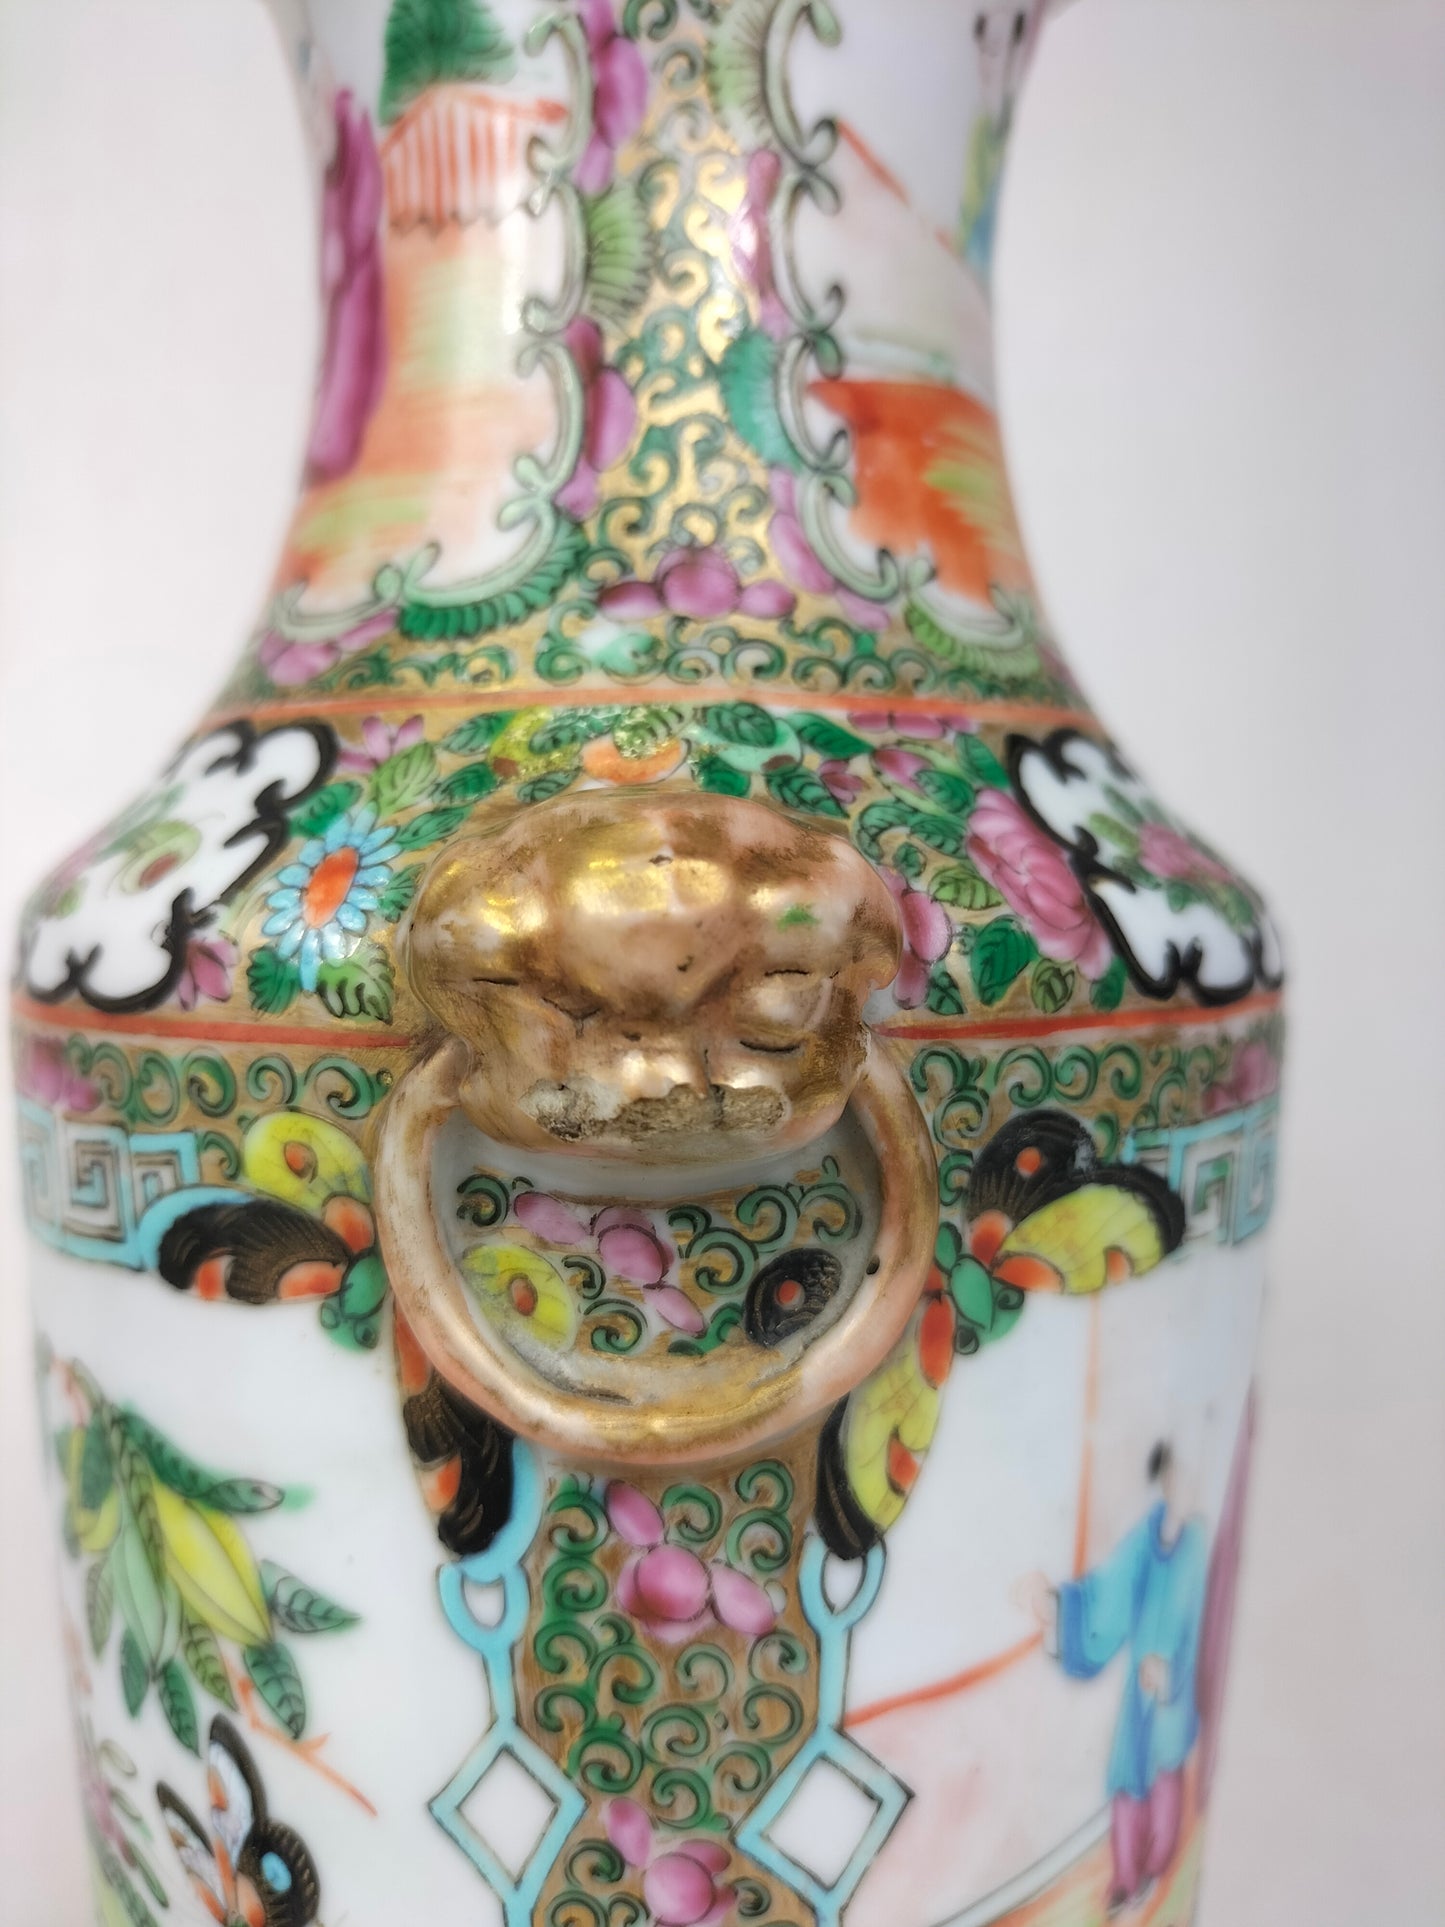 Pair of antique Chinese canton rose medallion vases // Qing Dynasty - 19th century